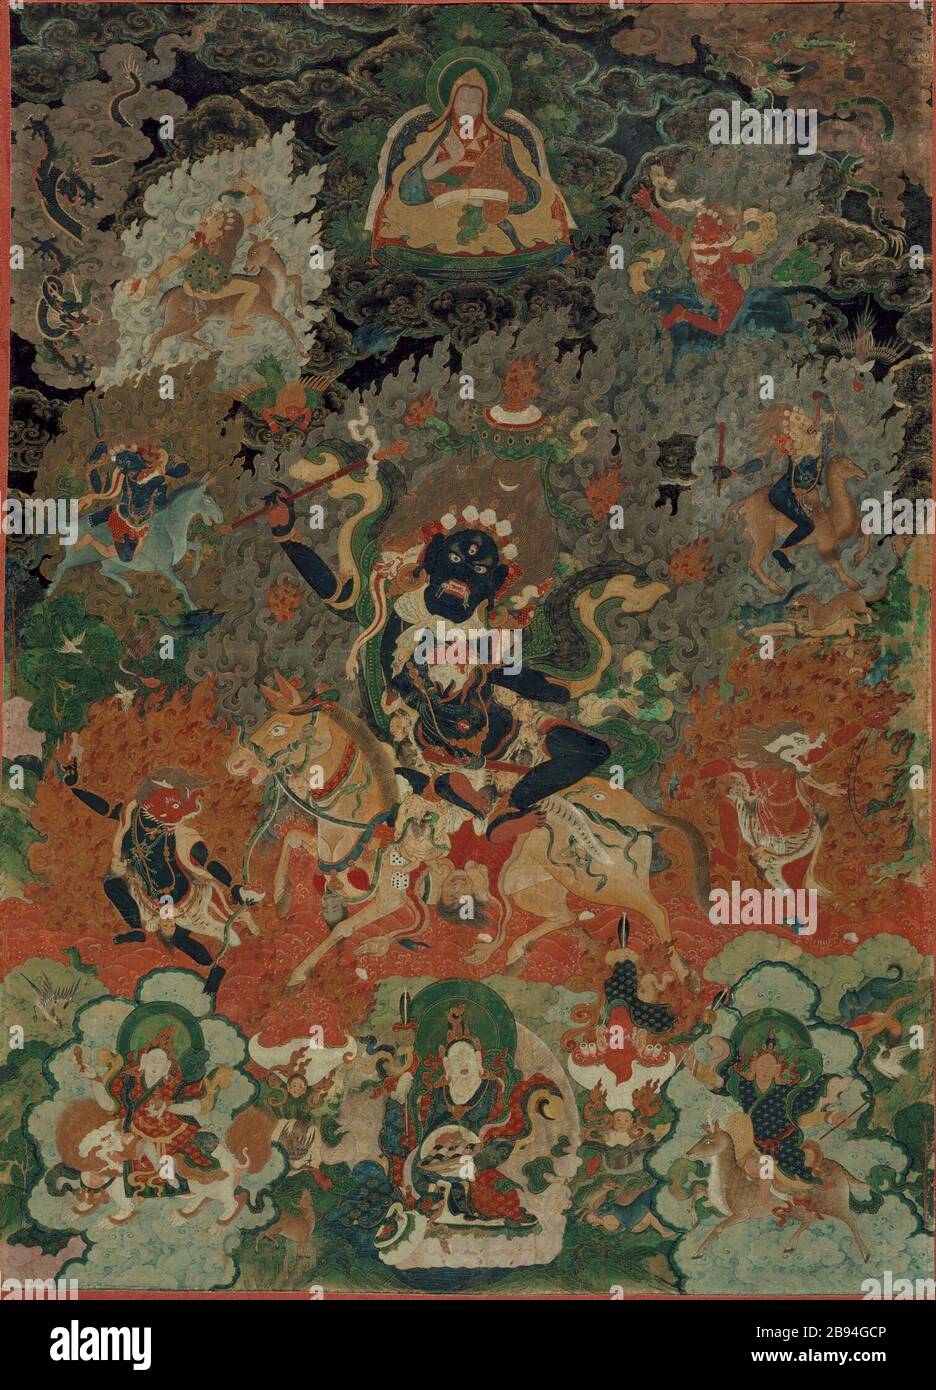 'Shri (Palden Lhamo); English:  Central Tibet, circa 1750-1850 Paintings Mineral pigments and gold on cotton cloth 28 1/2 x 21 1/4 in. (72.39 x 53.98 cm) From the Nasli and Alice Heeramaneck Collection, Museum Associates Purchase (M.83.105.17) South and Southeast Asian Art; between circa 1750 and circa 1850 date QS:P571,+1500-00-00T00:00:00Z/6,P1319,+1750-00-00T00:00:00Z/9,P1326,+1850-00-00T00:00:00Z/9,P1480,Q5727902; ' Stock Photo